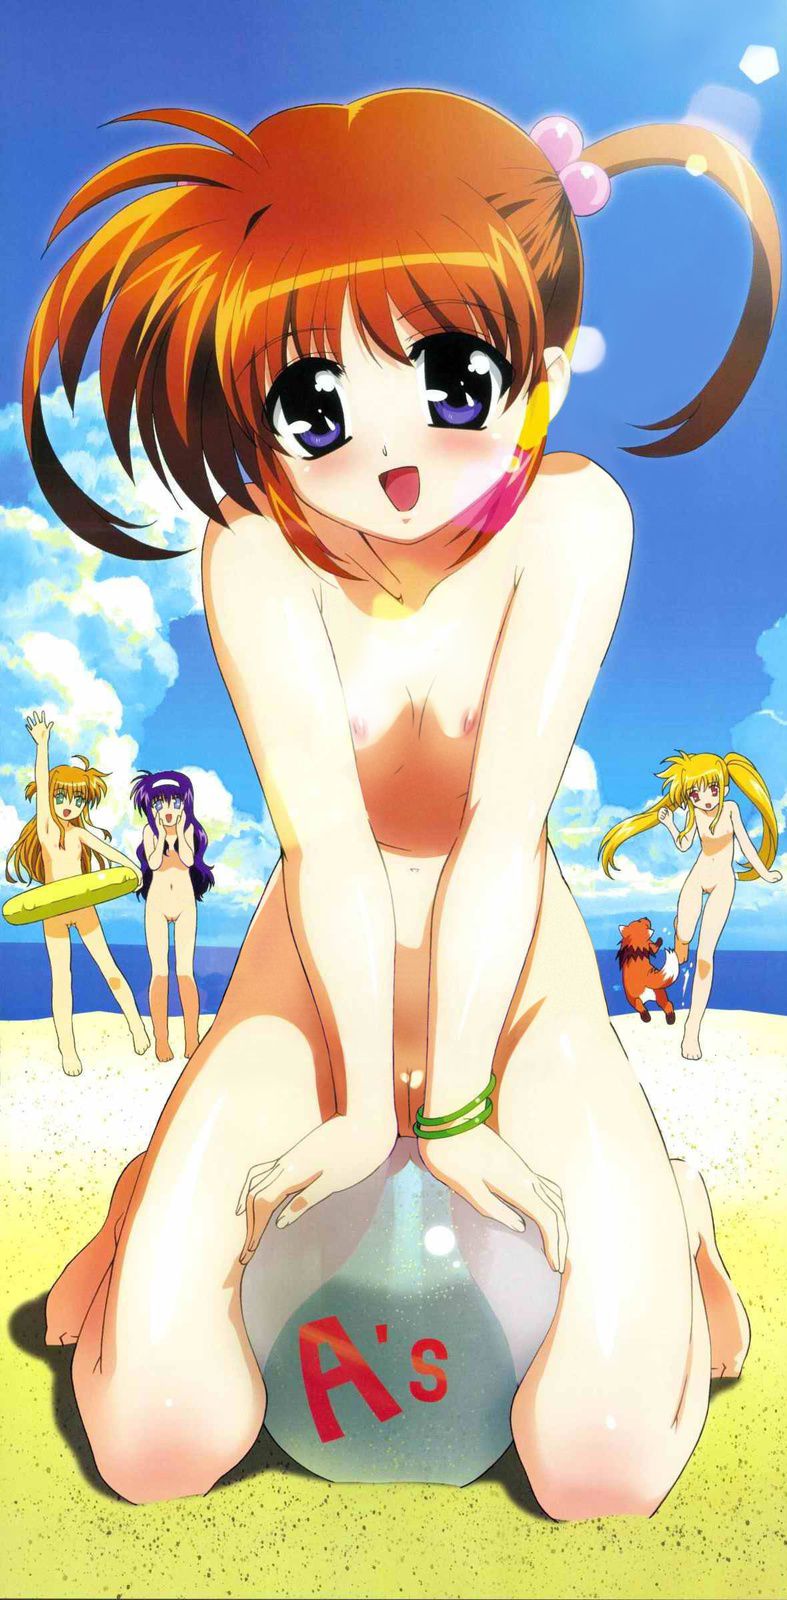 [Mahou Shoujo Lyrical Nanoha] is erotic image that you know the appeal of naughty 4